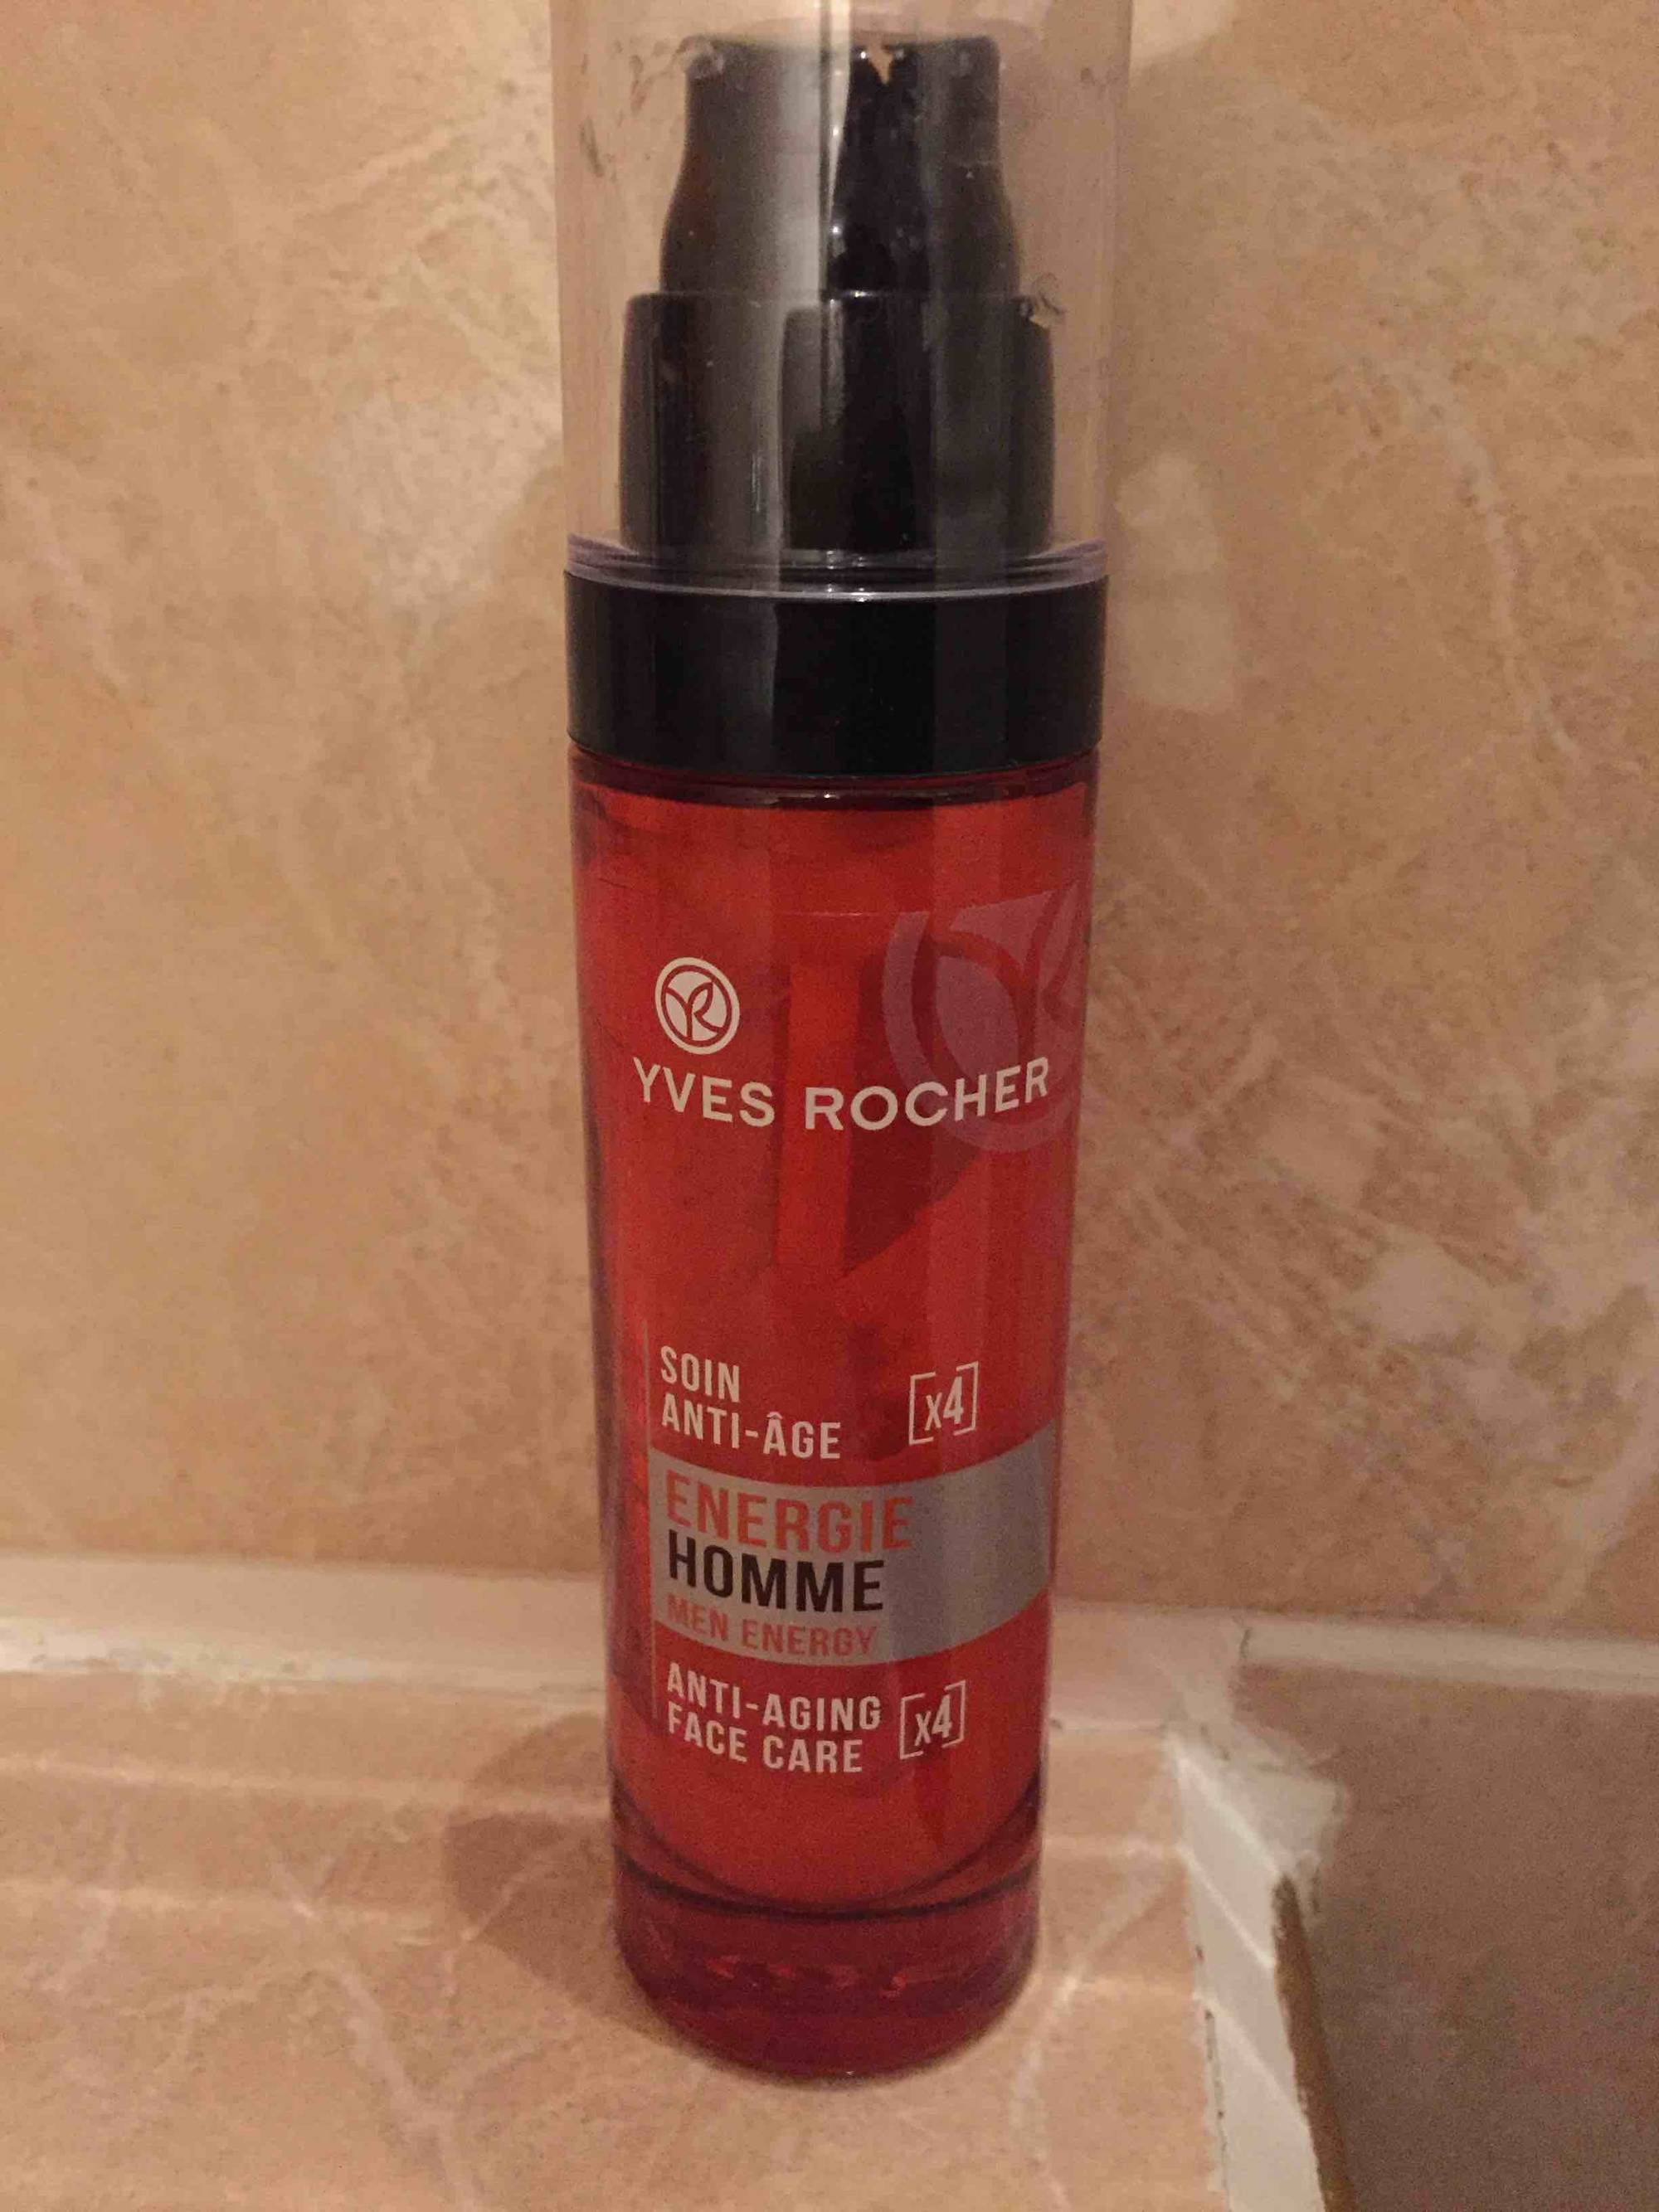 YVES ROCHER - Energie Homme - Soin anti-âge